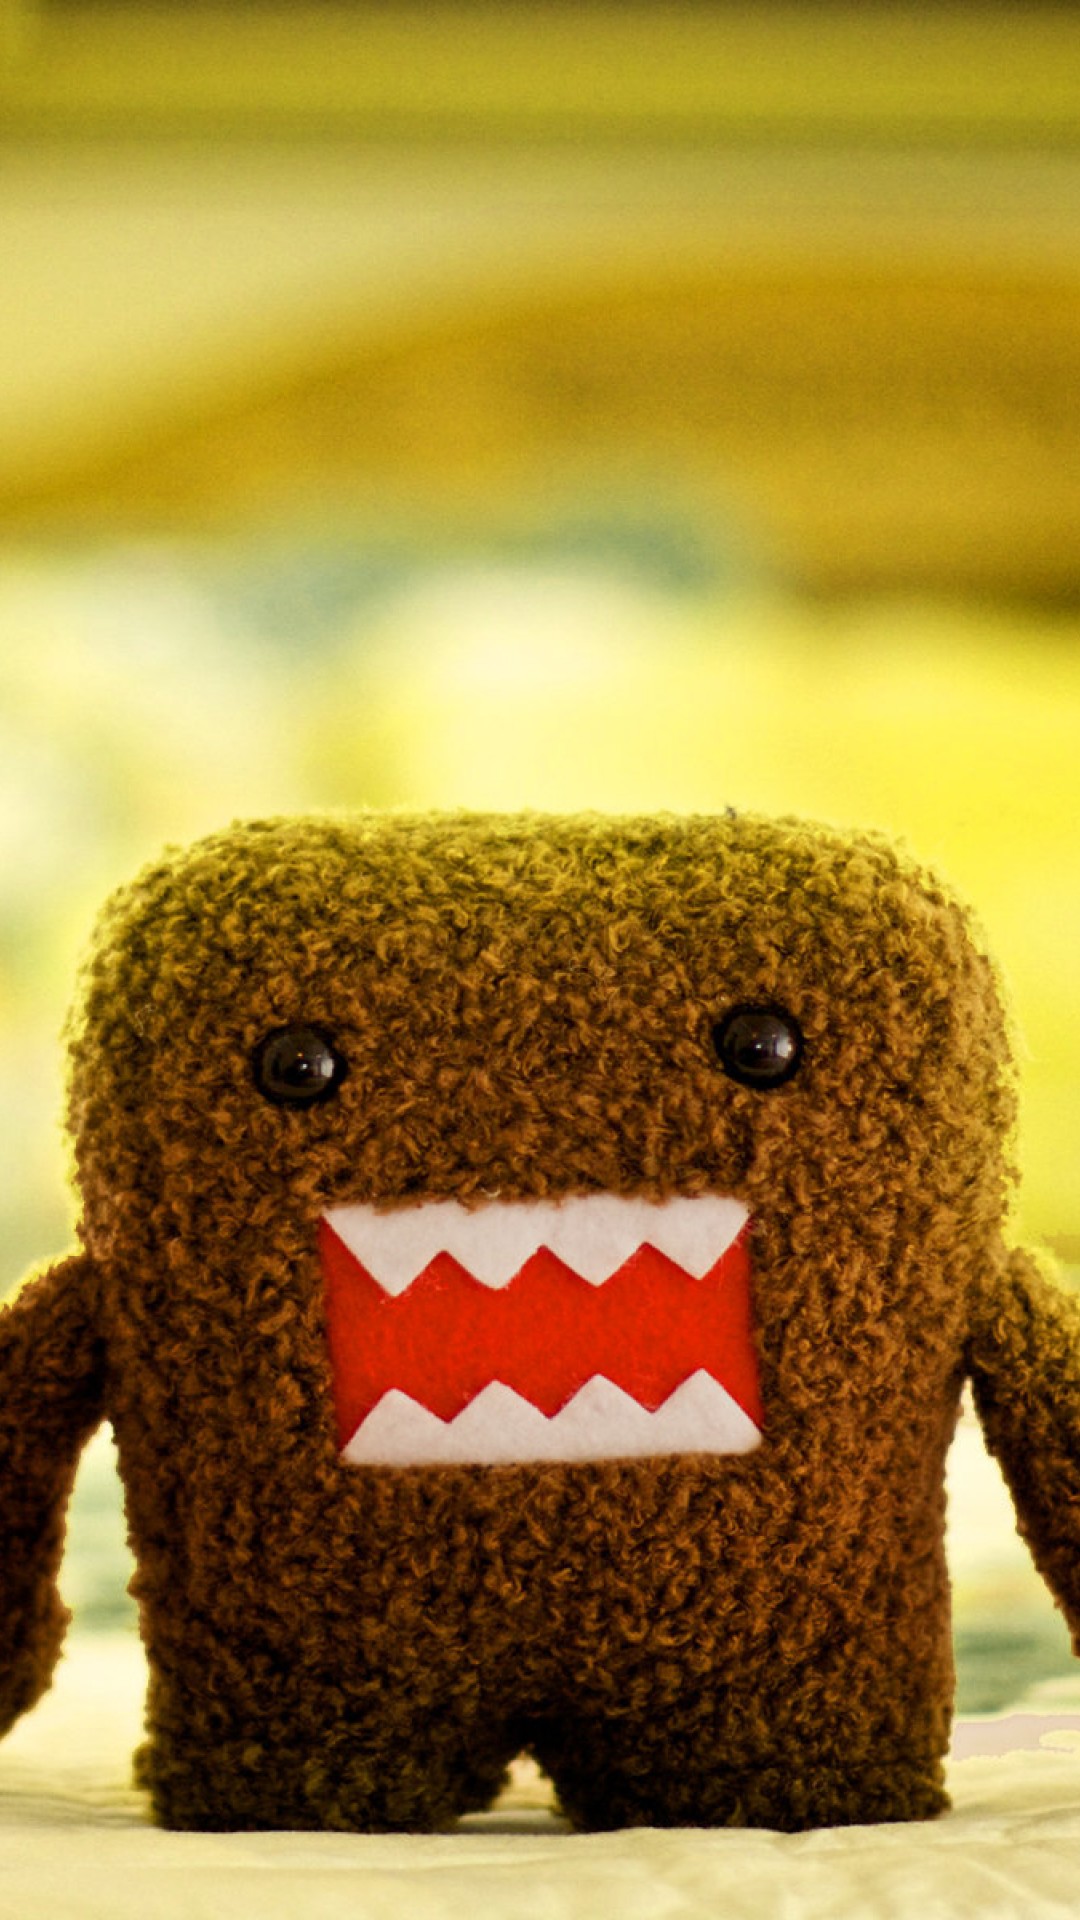 Most viewed Domo wallpapers | 4K Wallpapers